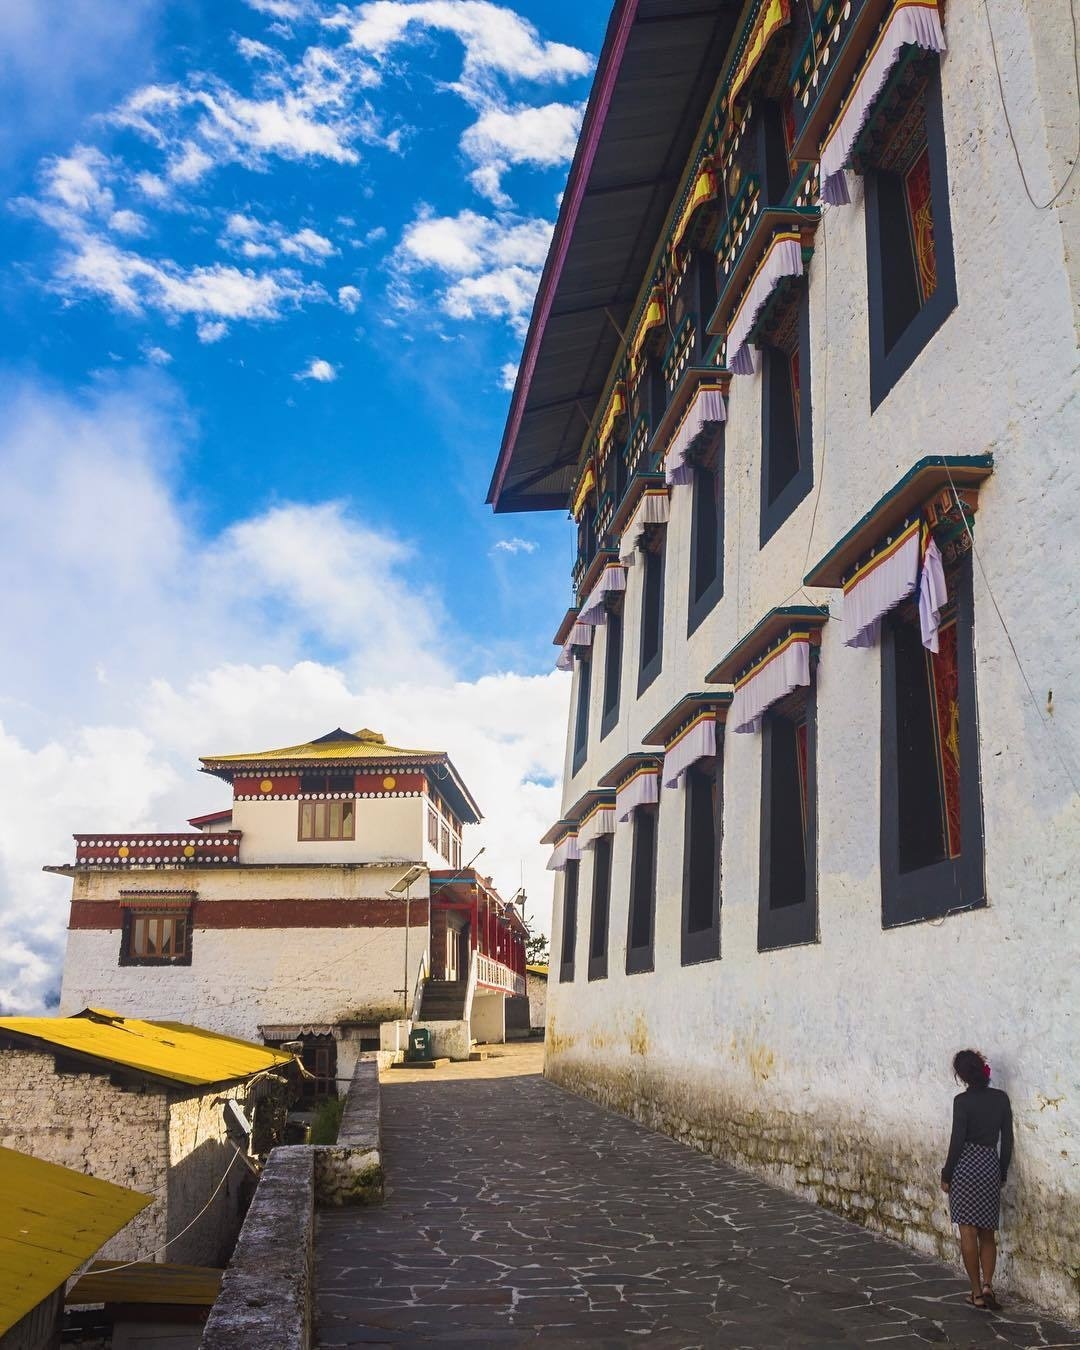 One of our favourite shots from Tawang monastery in Tawang, Arunachal Pradesh state, northeast India. 📿Tawang monastery is the largest Buddhist monastery in India and the 2nd largest in the world, only surpassed by Potala palace in Lhasa, Tibet. 💫It's a colossal, self-contained medieval citadel and built across three different levels and harbouring hundreds of resident monks.

In this image, you are observing the  approach to the main courtyard of the monastery. Jili is leaning against the whitewashed wall of the principal prayer house, which enshrines a huge Buddha statue. 

How elegant and refined those windows are! 

To the left are monks’ residential buildings with their distinctive yellow roofs. ✨That graceful edifice in the distance, situated right at the entrance to the main courtyard, is where you will find butter lamps 🔥burning inside a small room on the upper level. There is also a balcony up here where one can indulge in a magnificent panoramic view overlooking Tawang. 

We will have to show you that wonderful view another time.

⭐️So now tell us, how does this image make you feel? Is this the image that comes to your mind when somebody mentions the word India 🇮🇳? Do you think many people fail to grasp how diverse India truly is and dismiss it as a travel destination as a result?